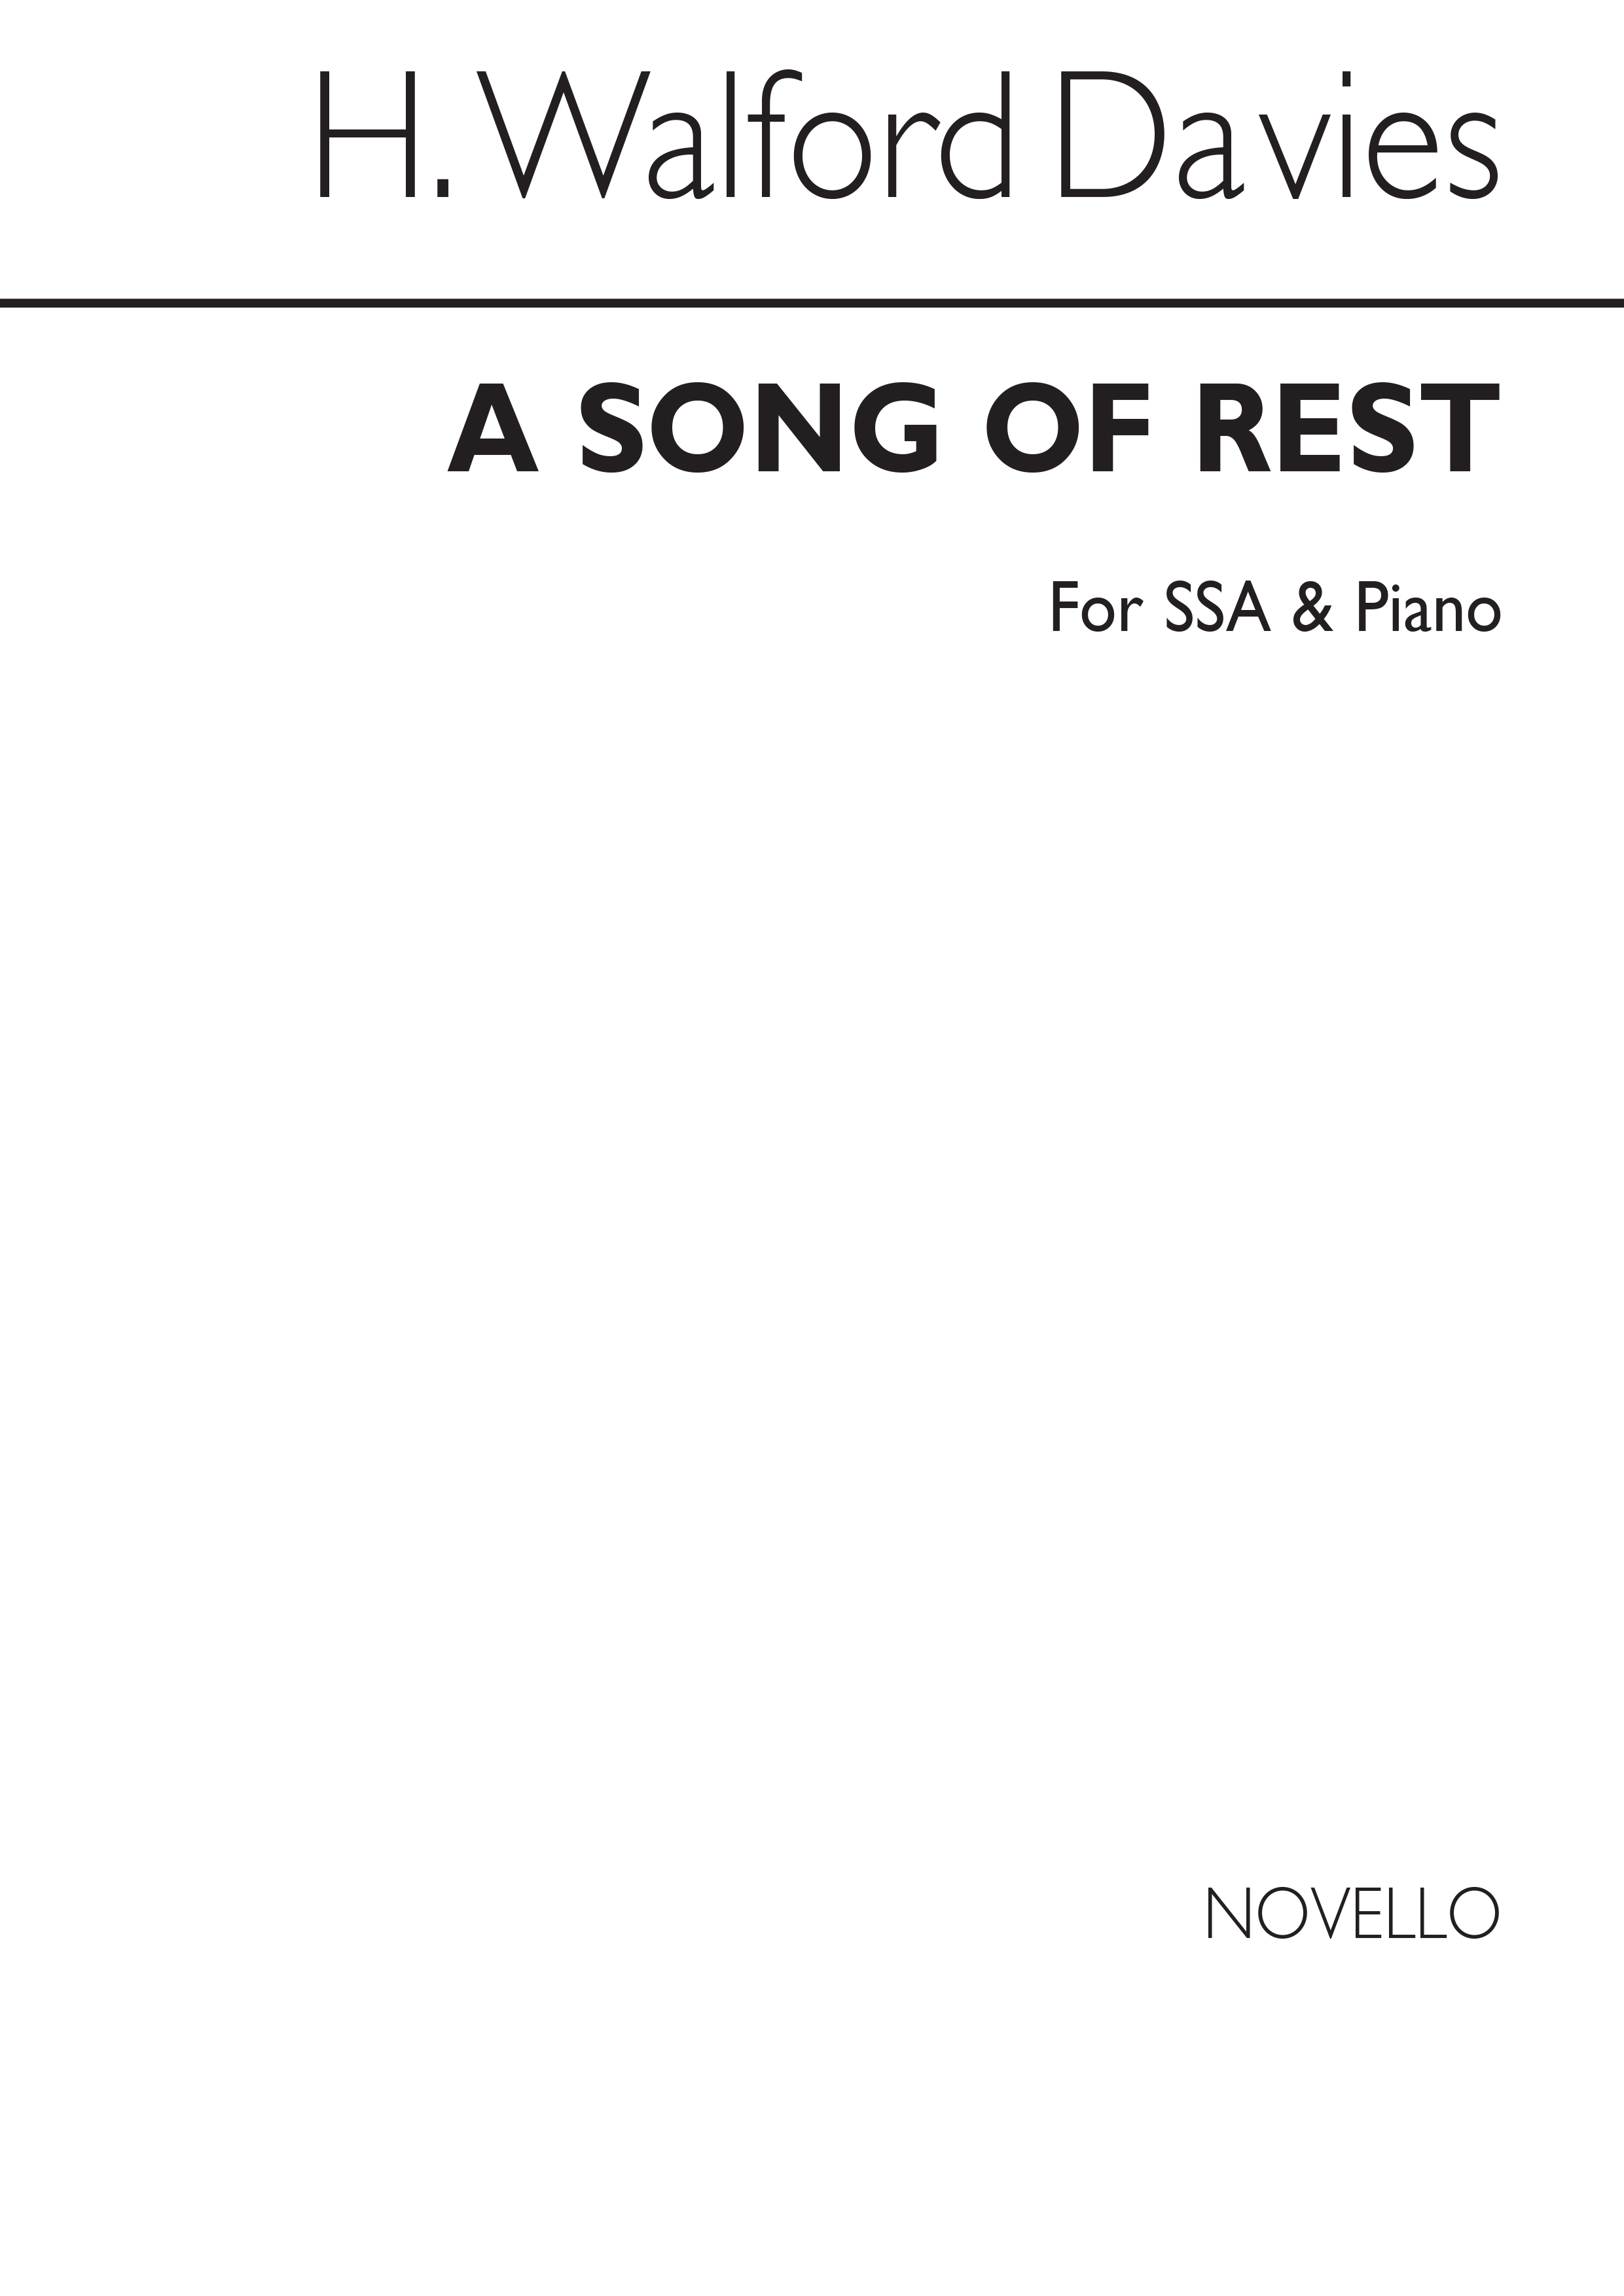 Walford Davies, H A Song Of Rest Ssa And Piano